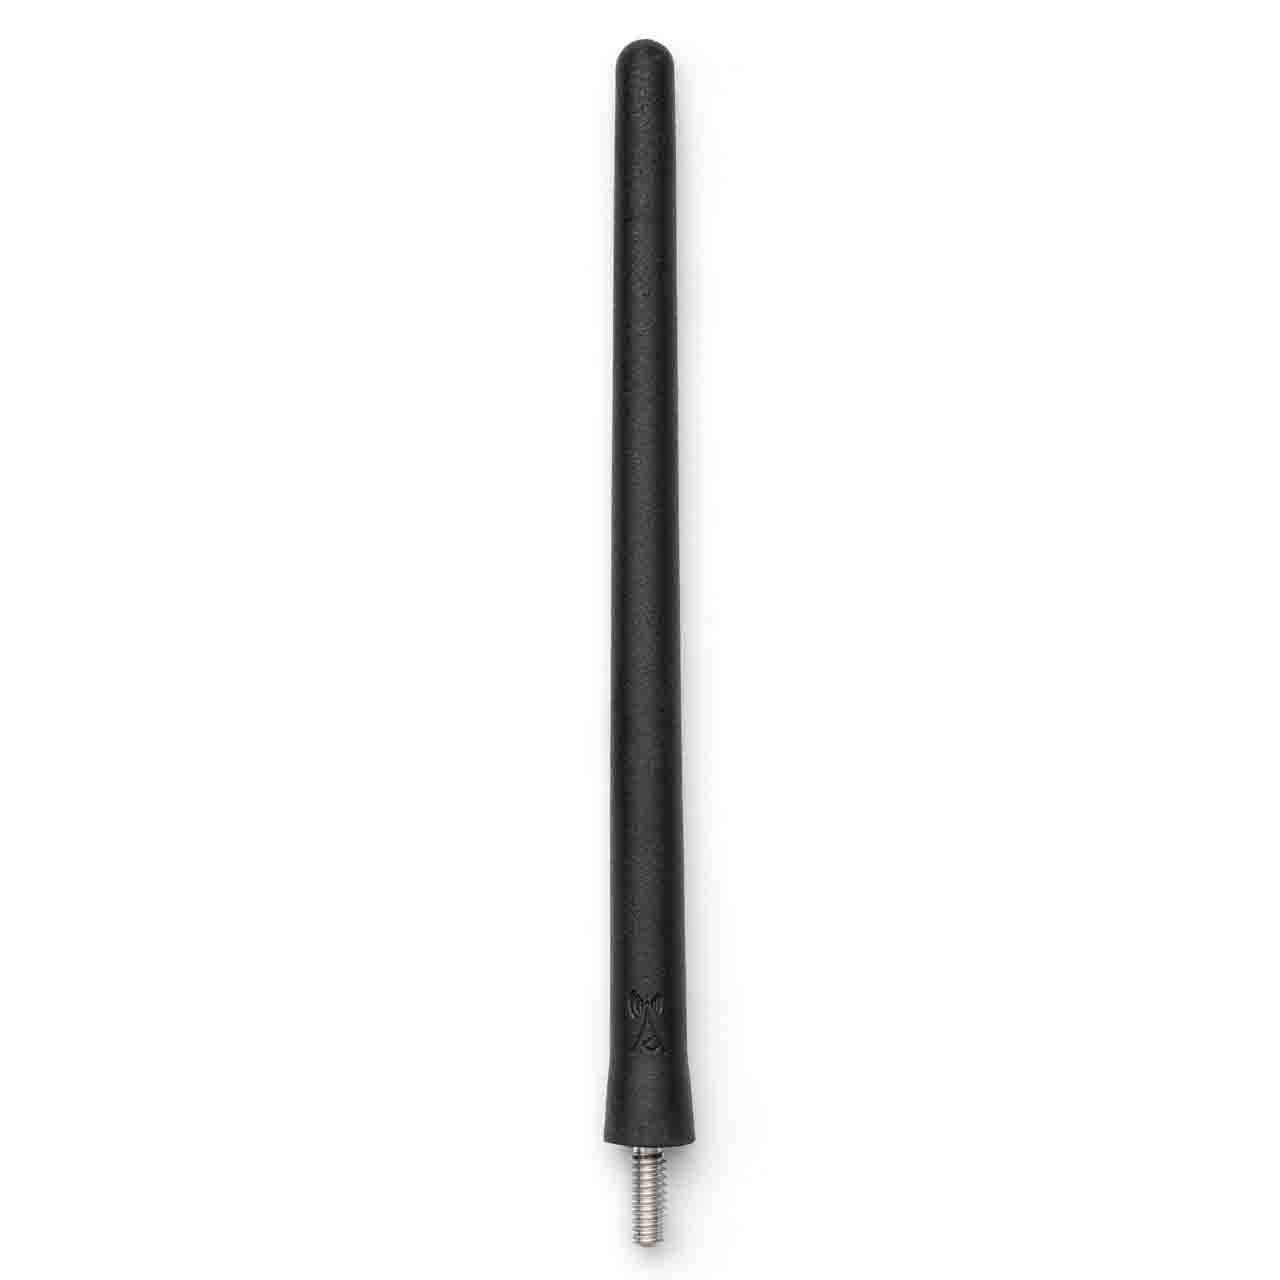 The Original 6 3/4 Inch - Car Wash Proof Short EPDM Rubber Antenna - USA Stainless Steel Threading - Powerful Internal Copper Coil/Premium Reception - Part Number A010-CB-15